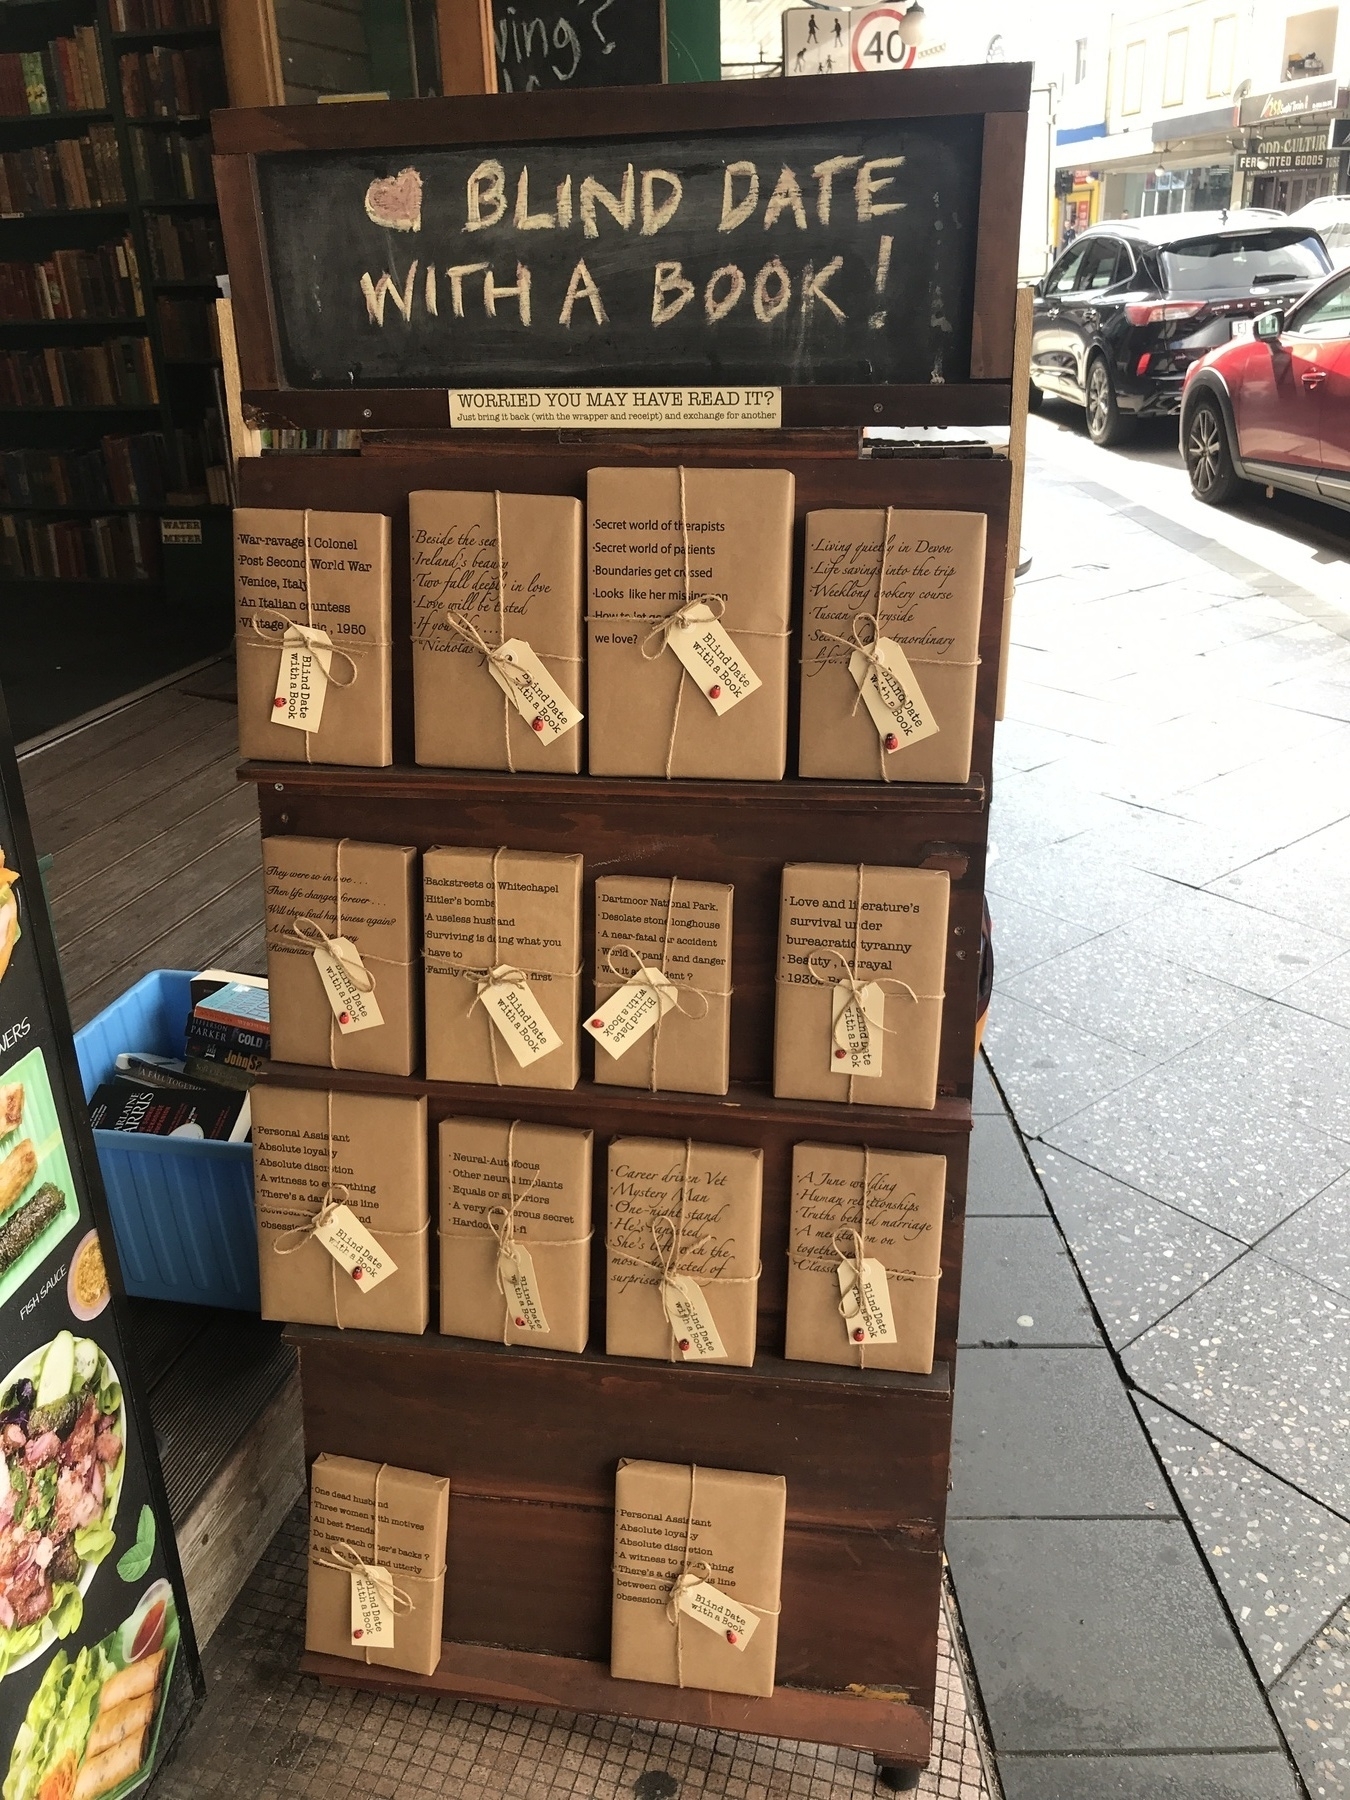 A timber stand on a footpath by a doorway, with parked cars in the background. The stand has four narrow shelves, and each shelf holds books facing outwards, wrapped in brown paper and tied with string. The top three shelves have four books each, and the bottom shelf has two. Key phrases about each book are written on the front, like ‘Career driven vet’, ‘A June Wedding’, ‘Backstreets of Whitechapel’ and ‘War-ravaged Colonel’. A chalkboard above the stand says: ‘Blind Date with a Book!’ with a heart beside it. A “sticker beneath that says: ‘Worried you may have read it? Just bring it back (with the wrapper and receipt) and exchange for another.